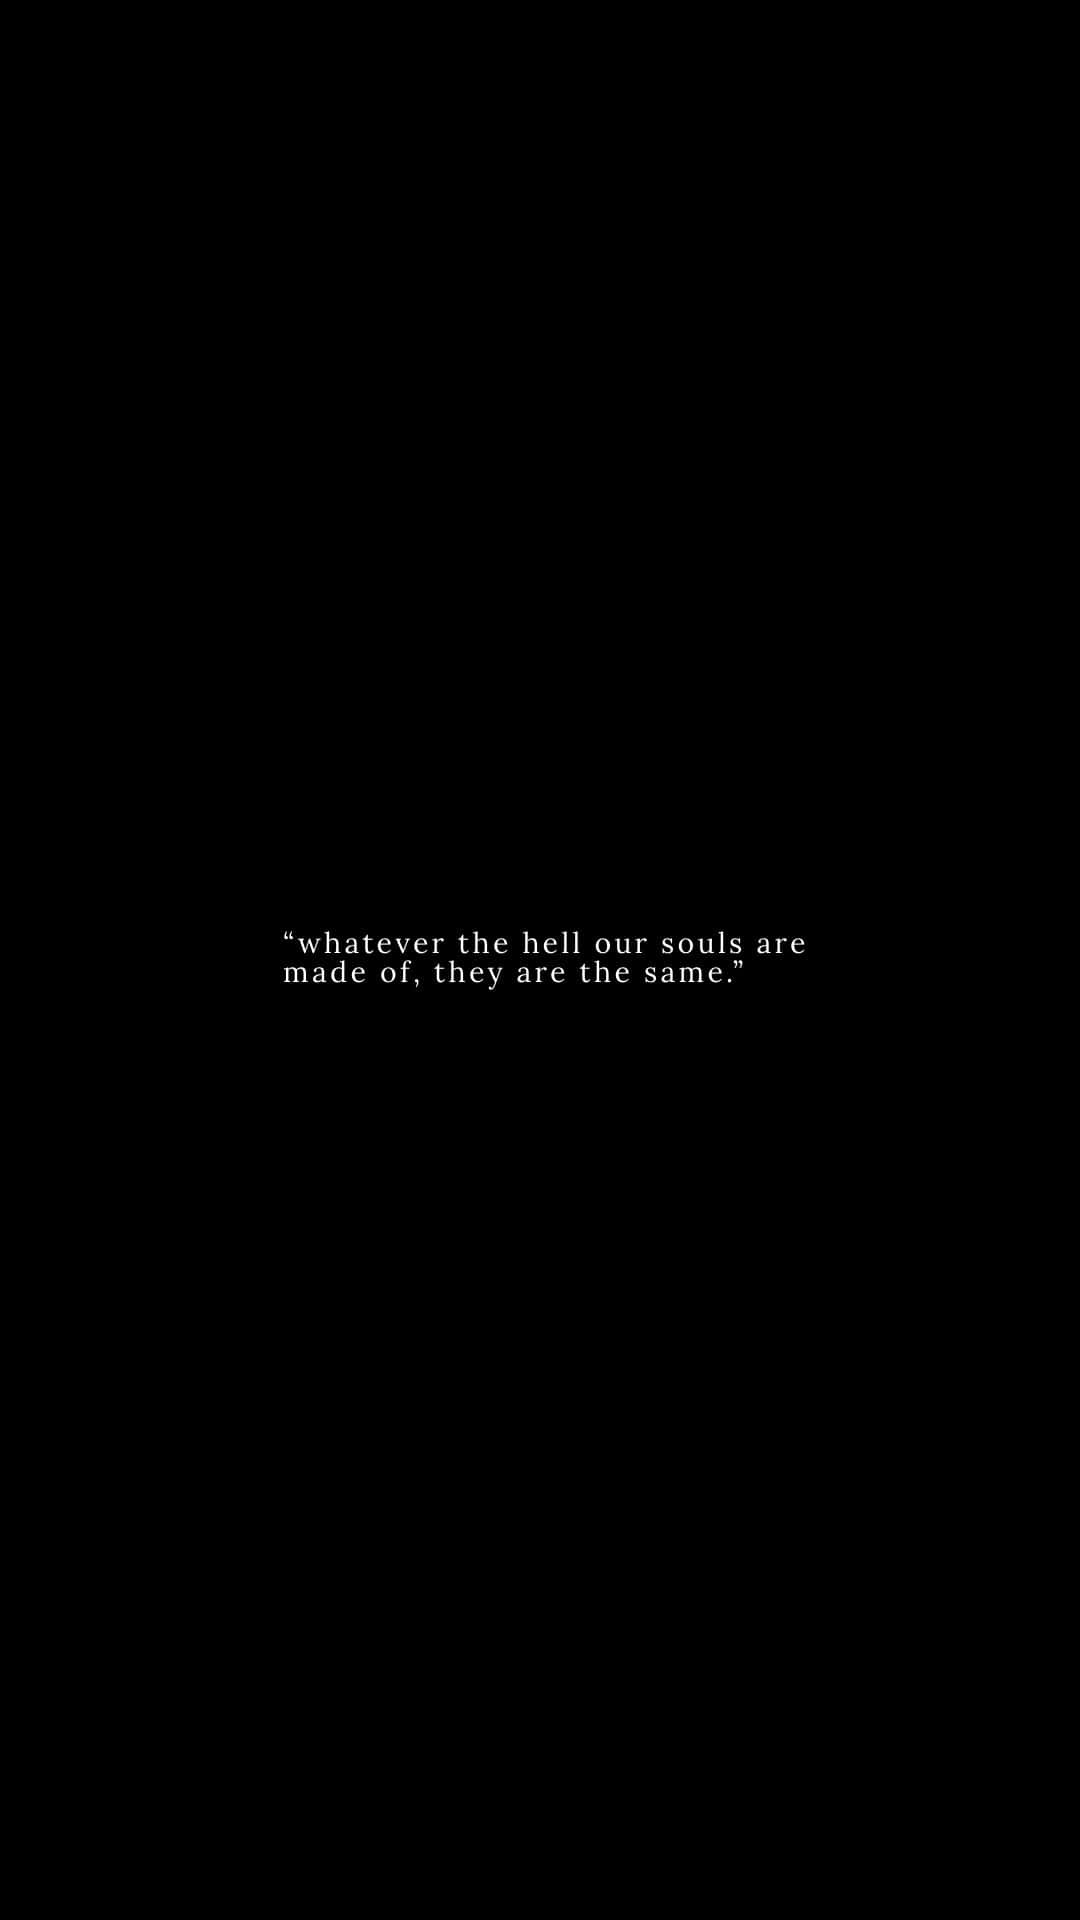 Souls Quote Black Background Wallpaper